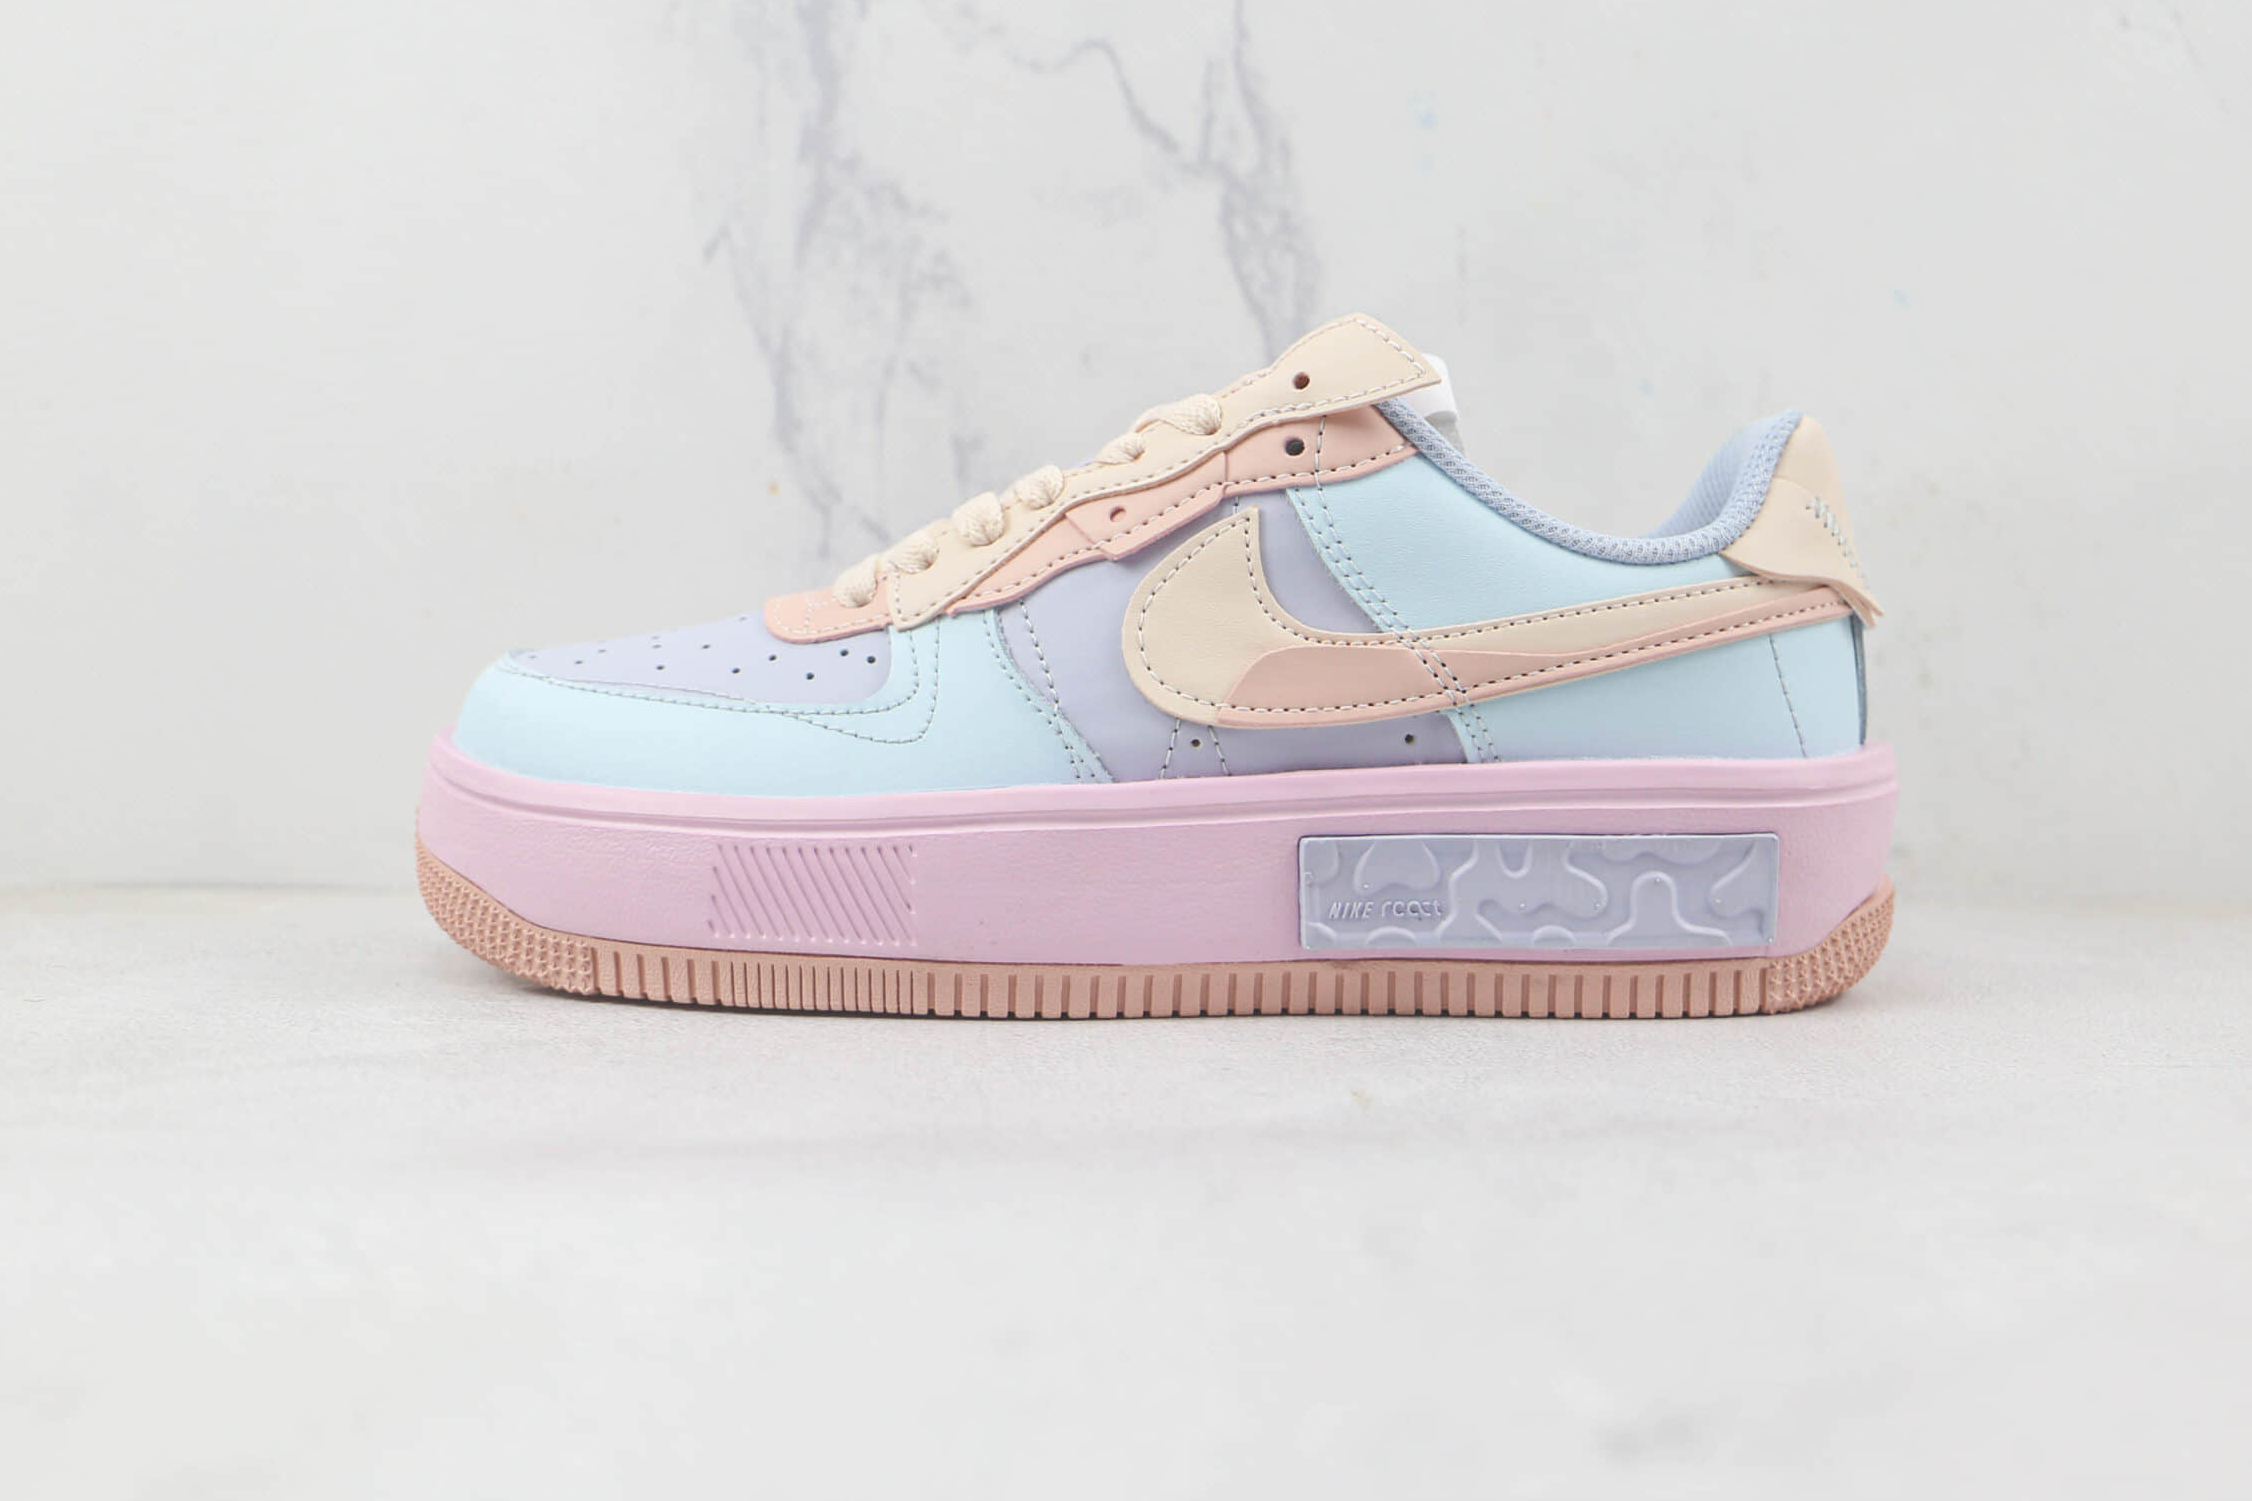 Nike Air Force 1 Fontanka Low Pink Blue Purple CW6688-608 - Stylish and Vibrant Women's Sneakers